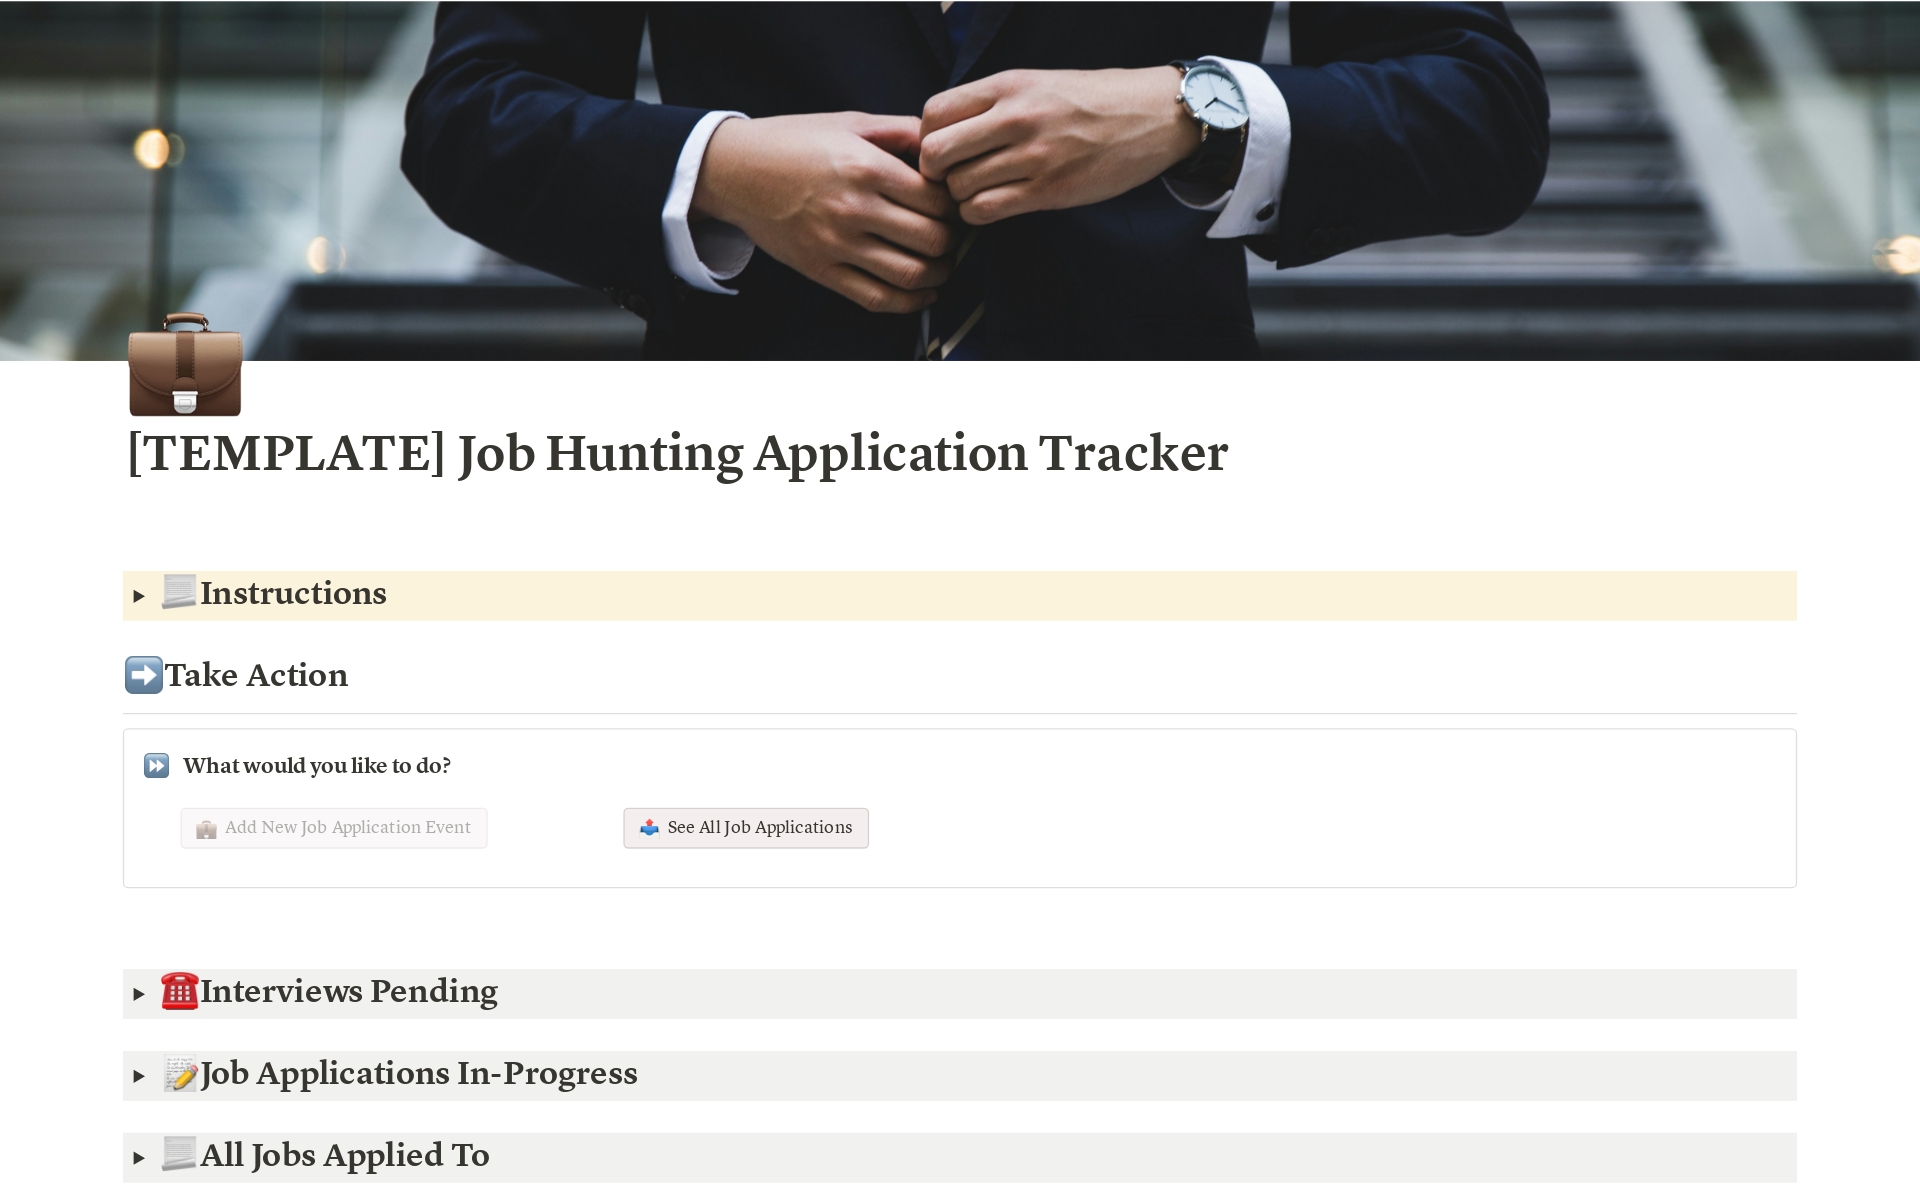 Job Hunting and Application Tracker - Helping job seekers track the status of their job hunt. 